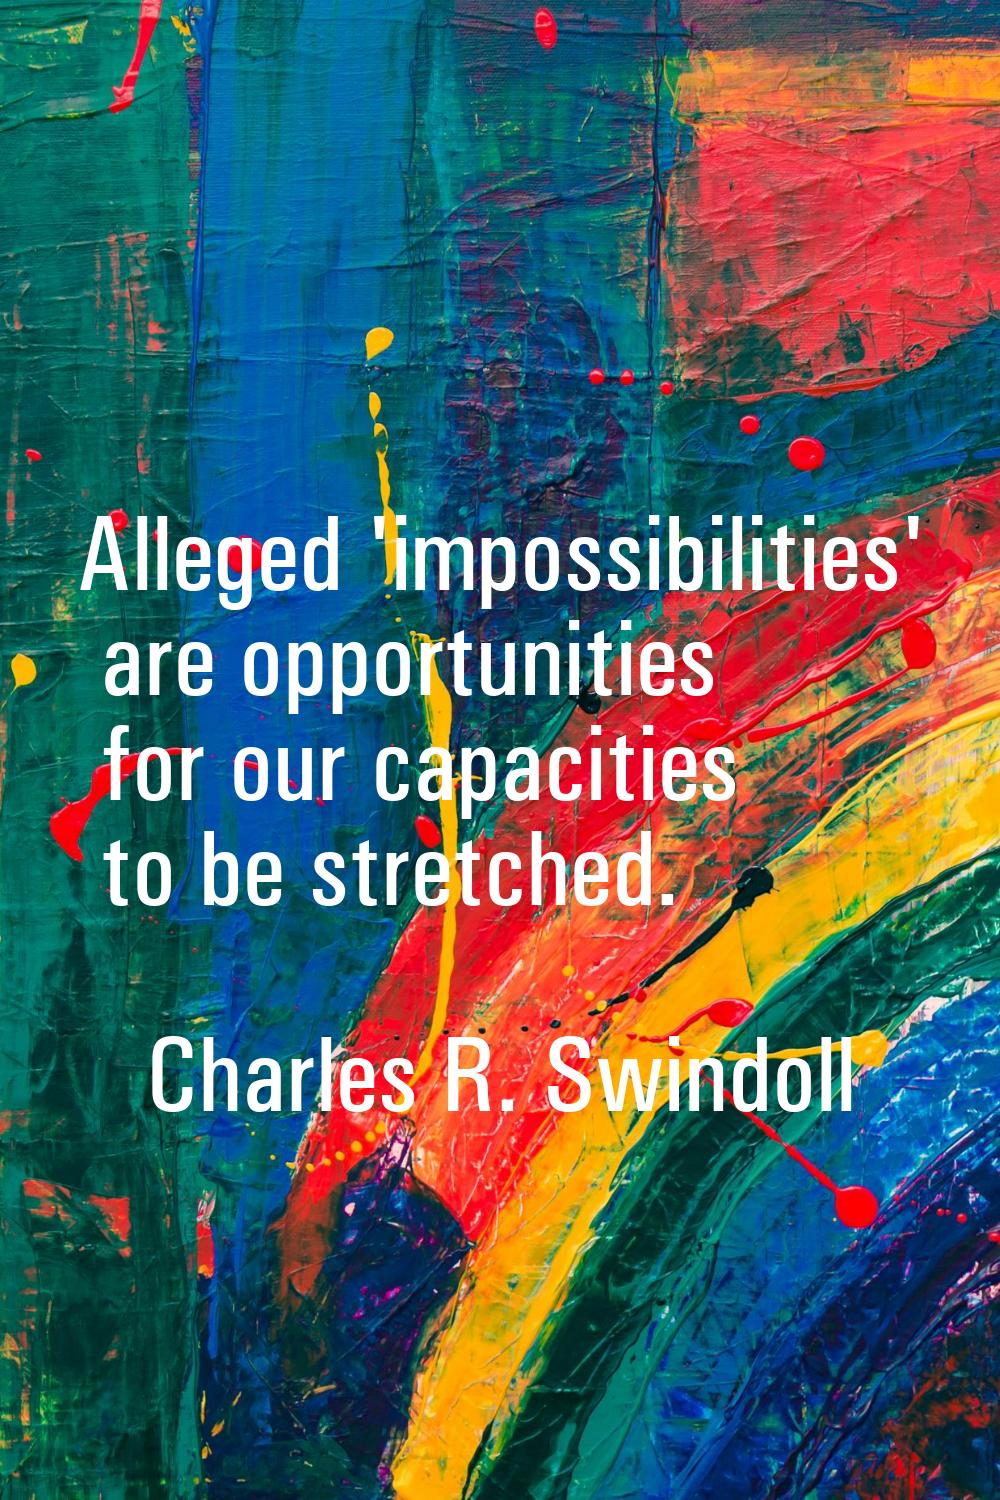 Alleged 'impossibilities' are opportunities for our capacities to be stretched.